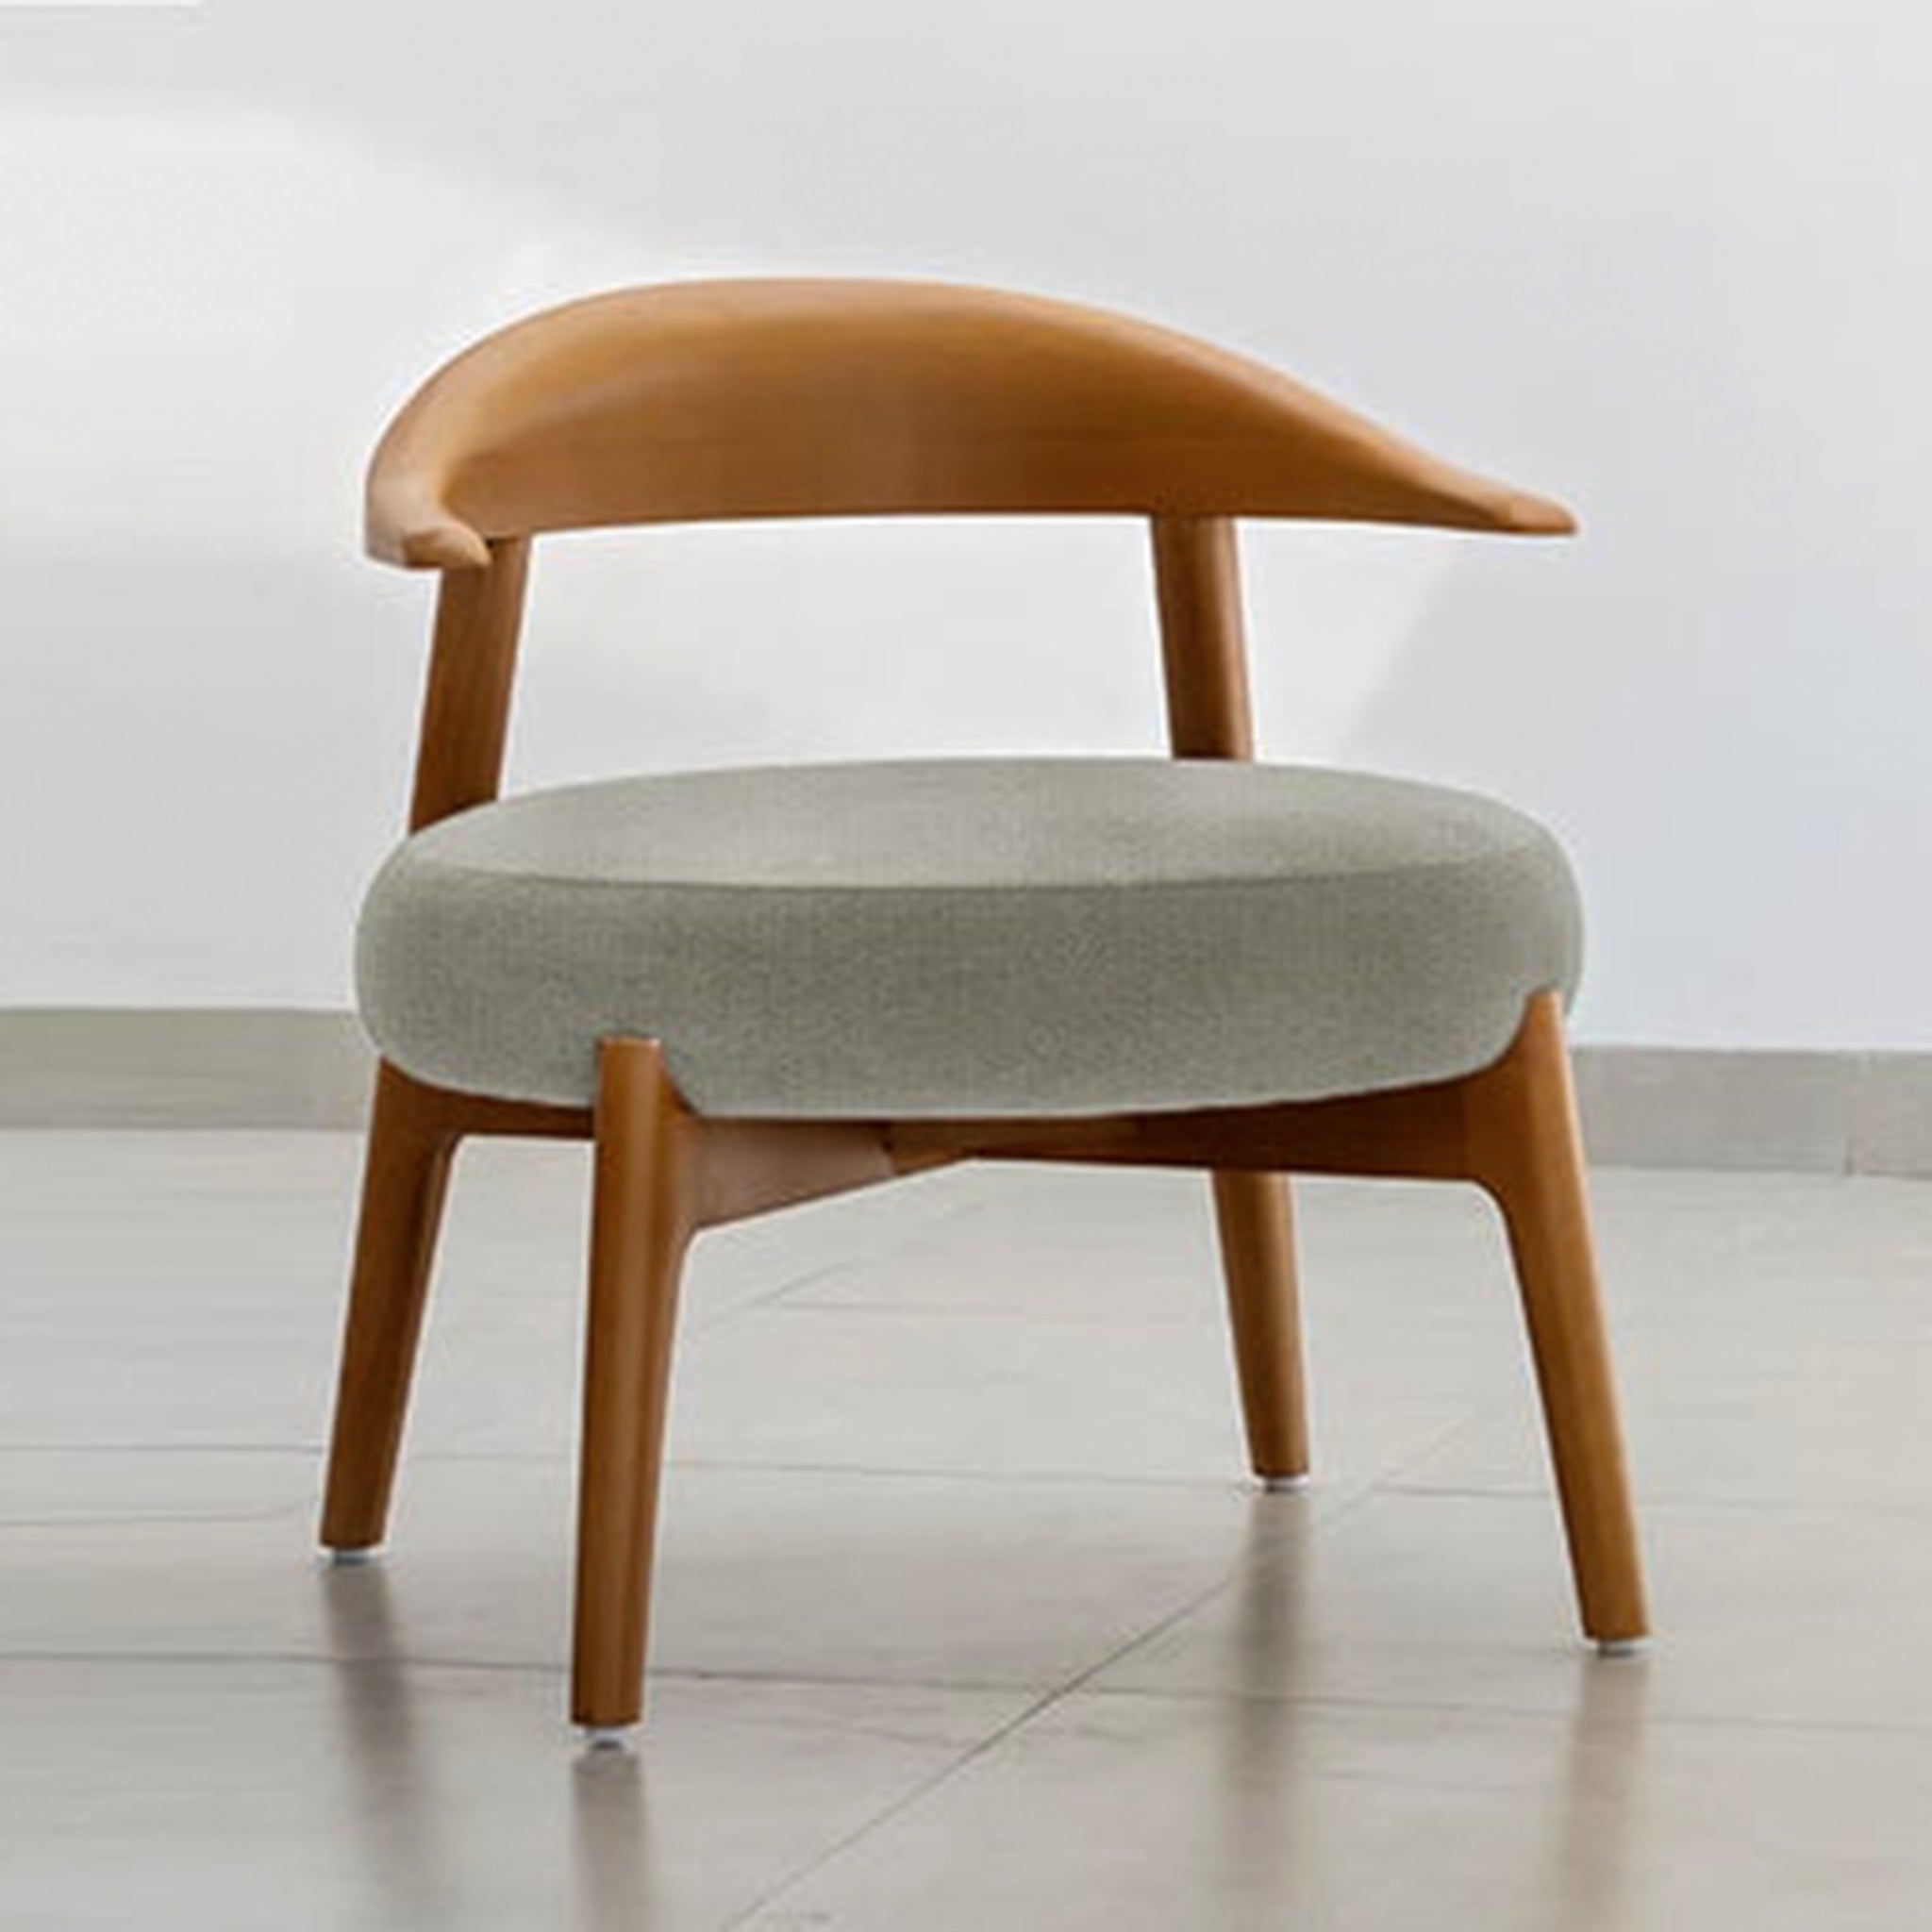 "The Hyde Accent Chair with elegant wooden design and plush seat"